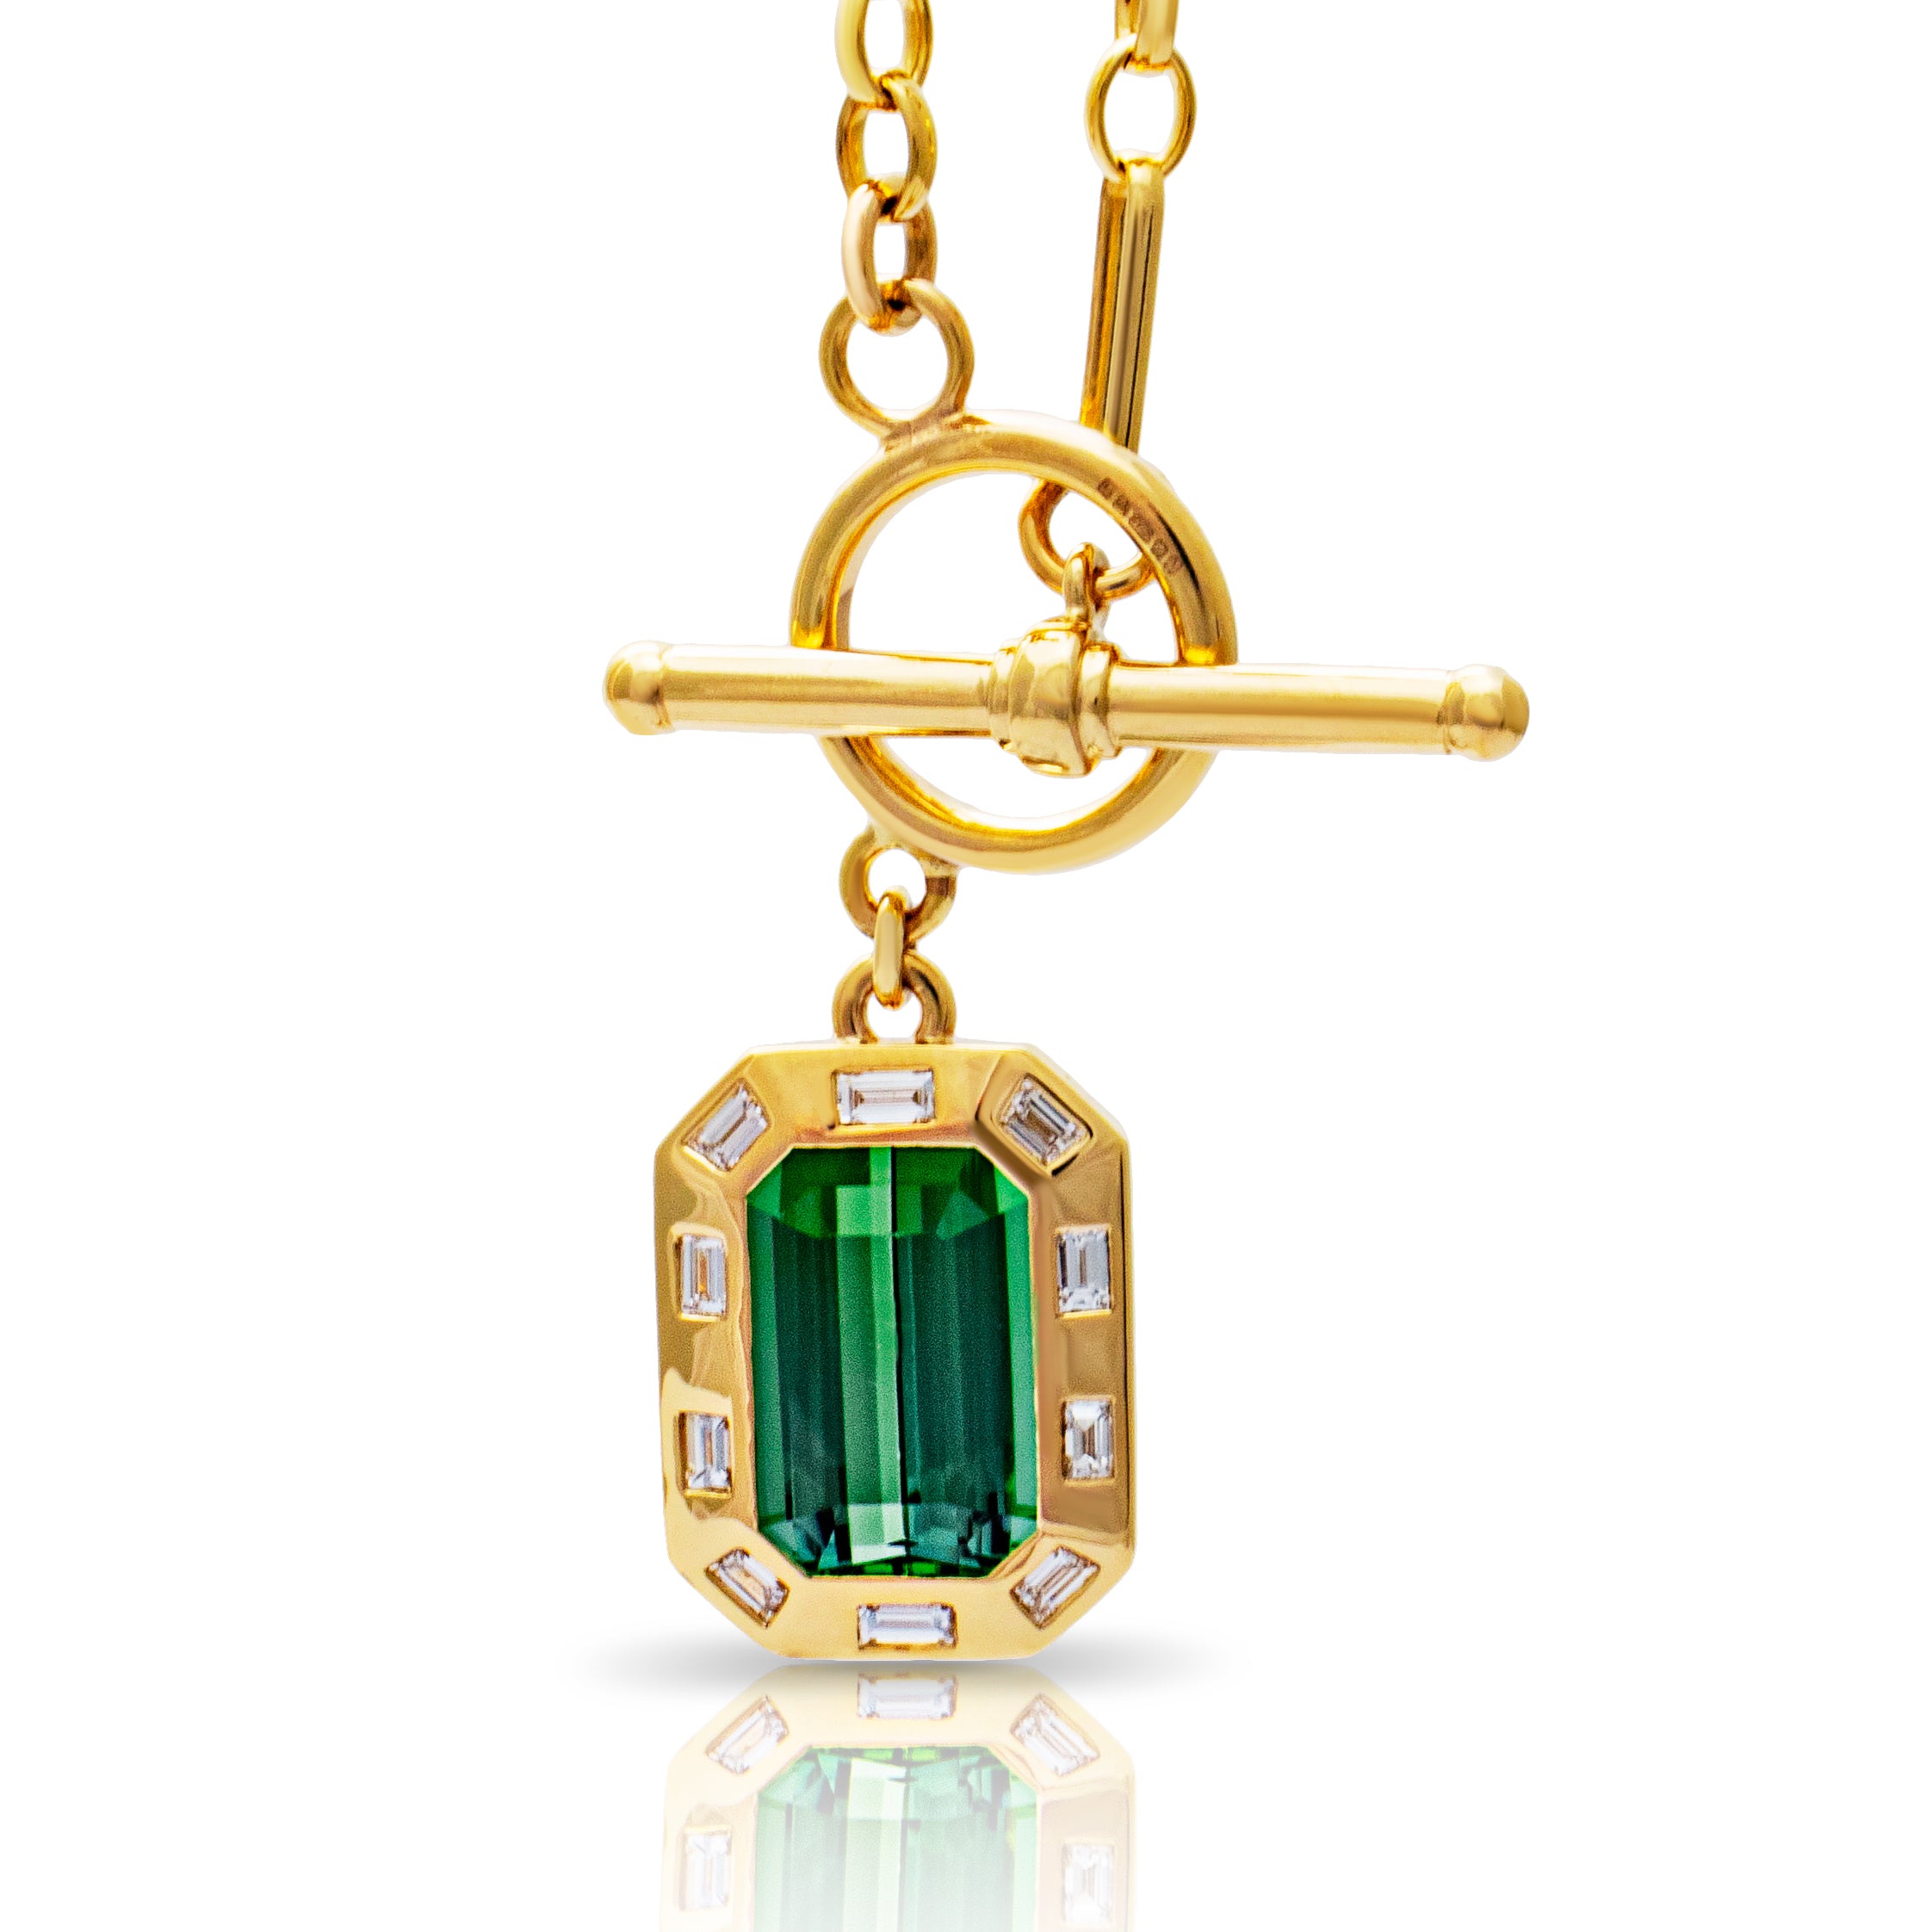 Green tourmaline t-bar necklace. Signature t-bar necklace. Green tourmaline necklace. Green gemstone necklace. Green tourmaline and diamonds. Green gemstone pendant necklace. Serena Ansell T-bar necklace. Solid gold necklace. Fine jewellery London. Serena Ansell Jewellery. 